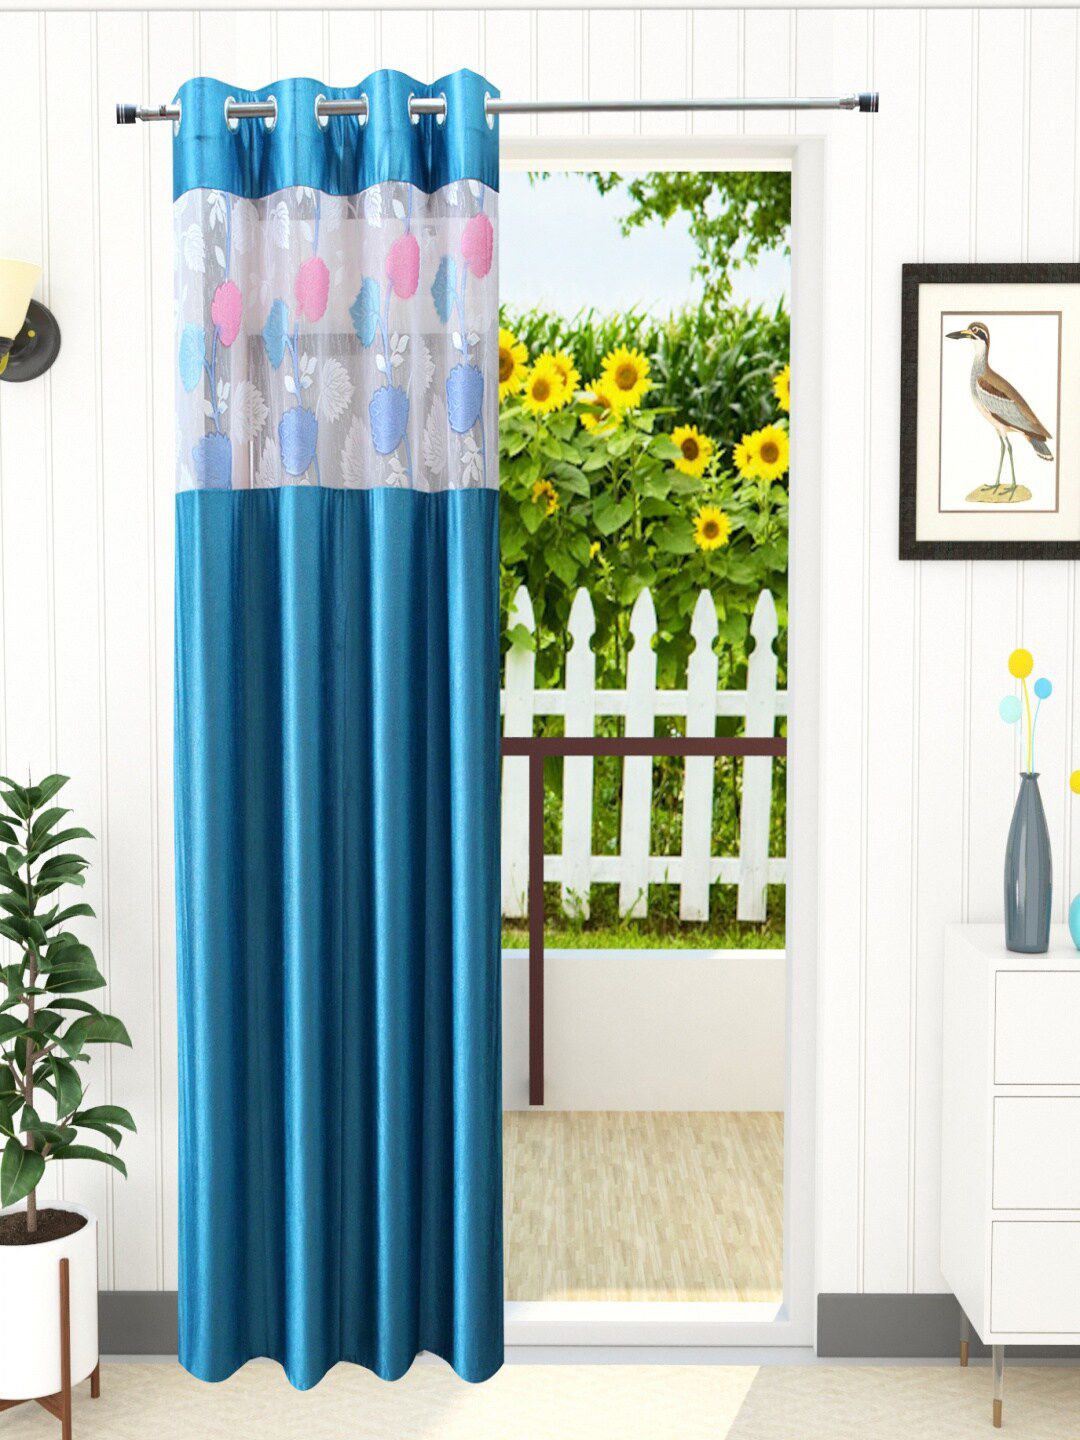 Homefab India Turquoise Blue & White Set of 2 Sheer Door Curtain Price in India